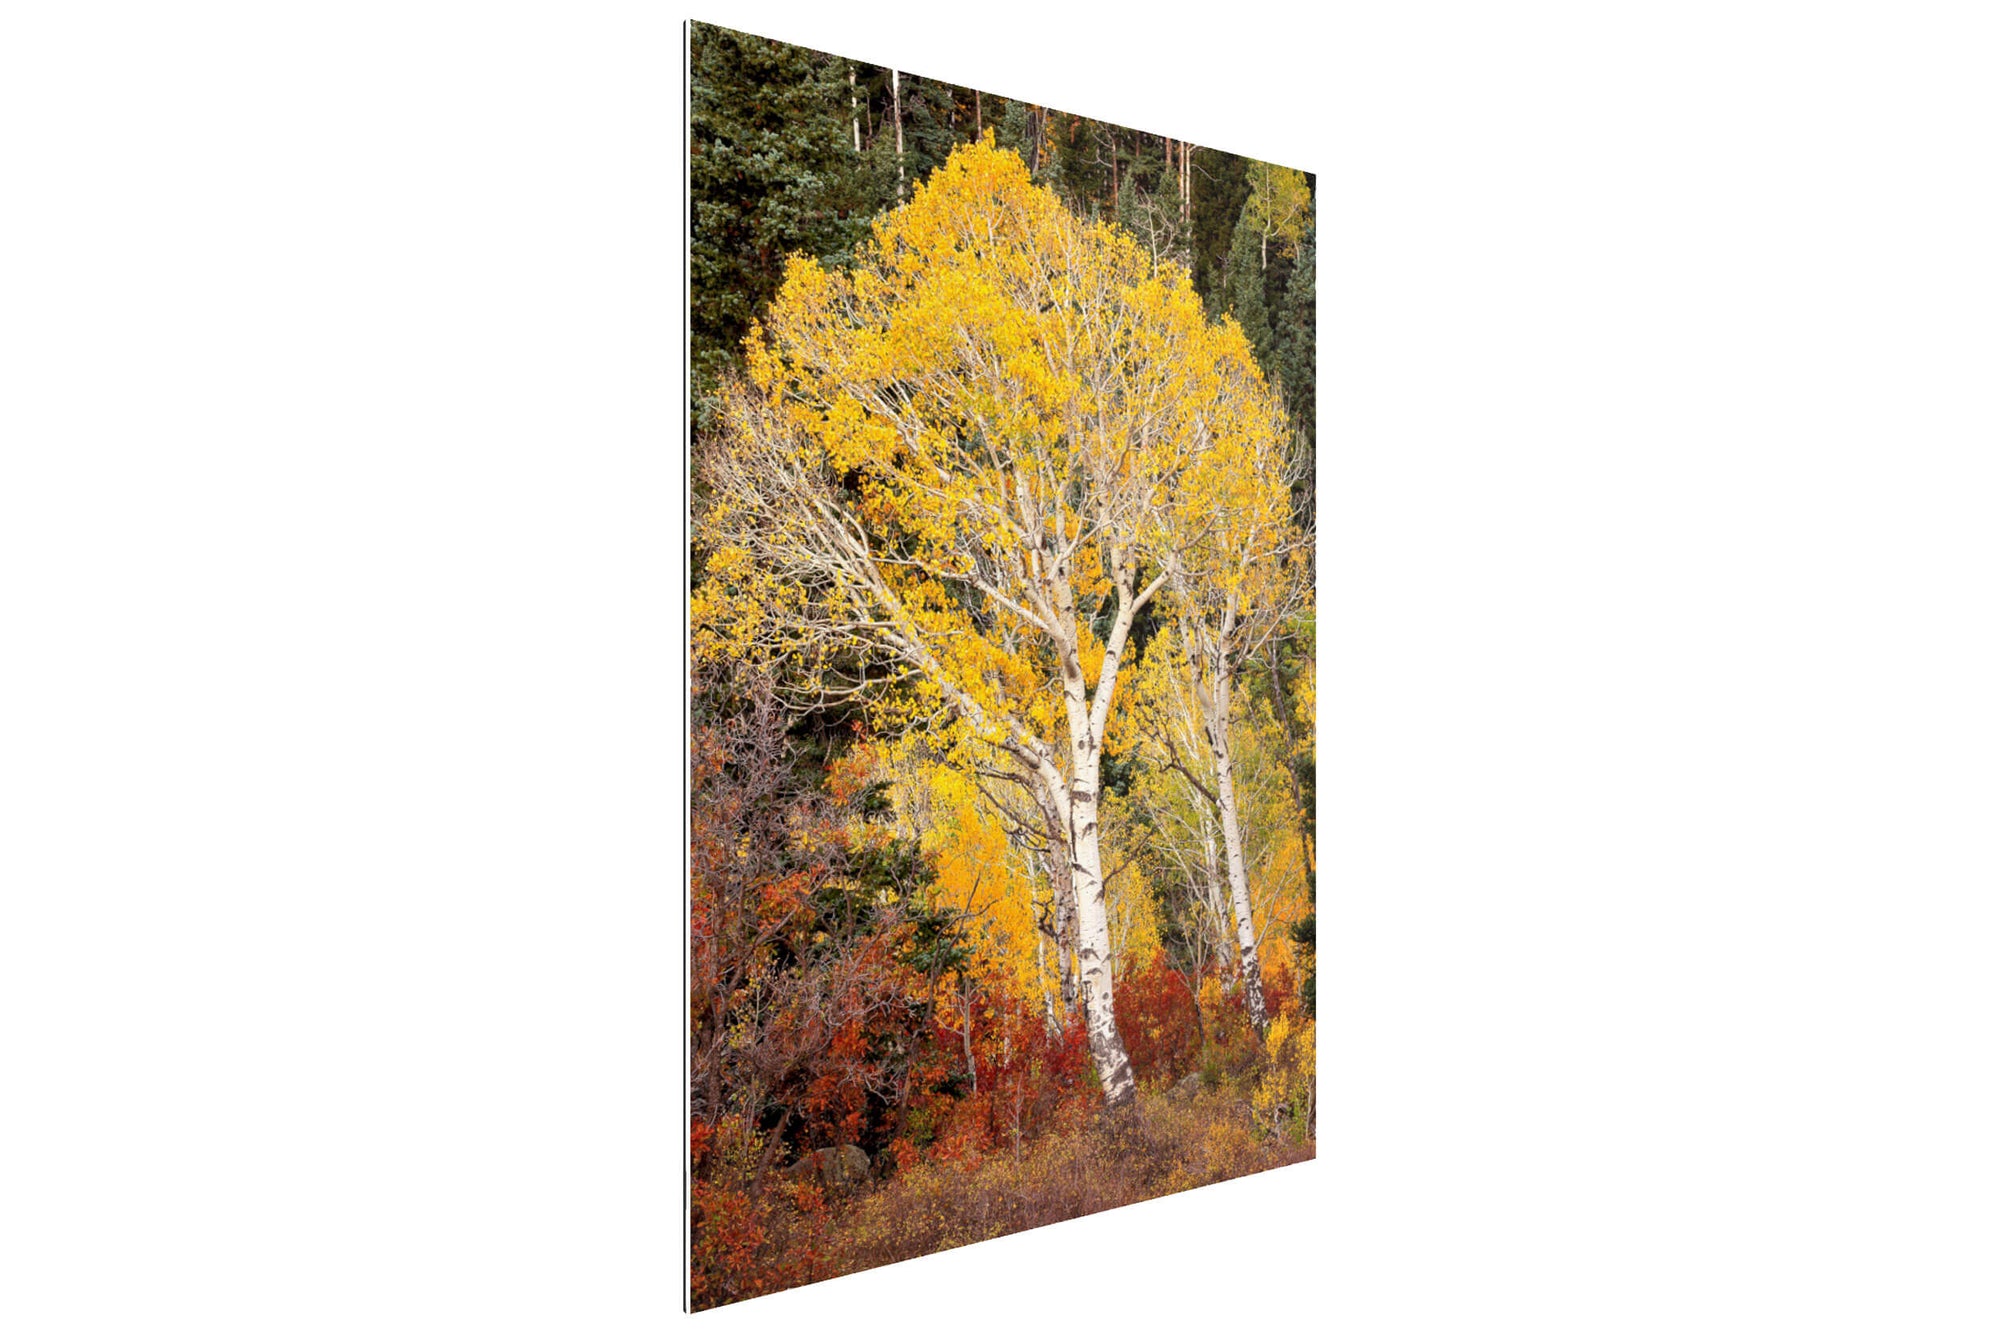 A TruLife acrylic Telluride fall colors picture.